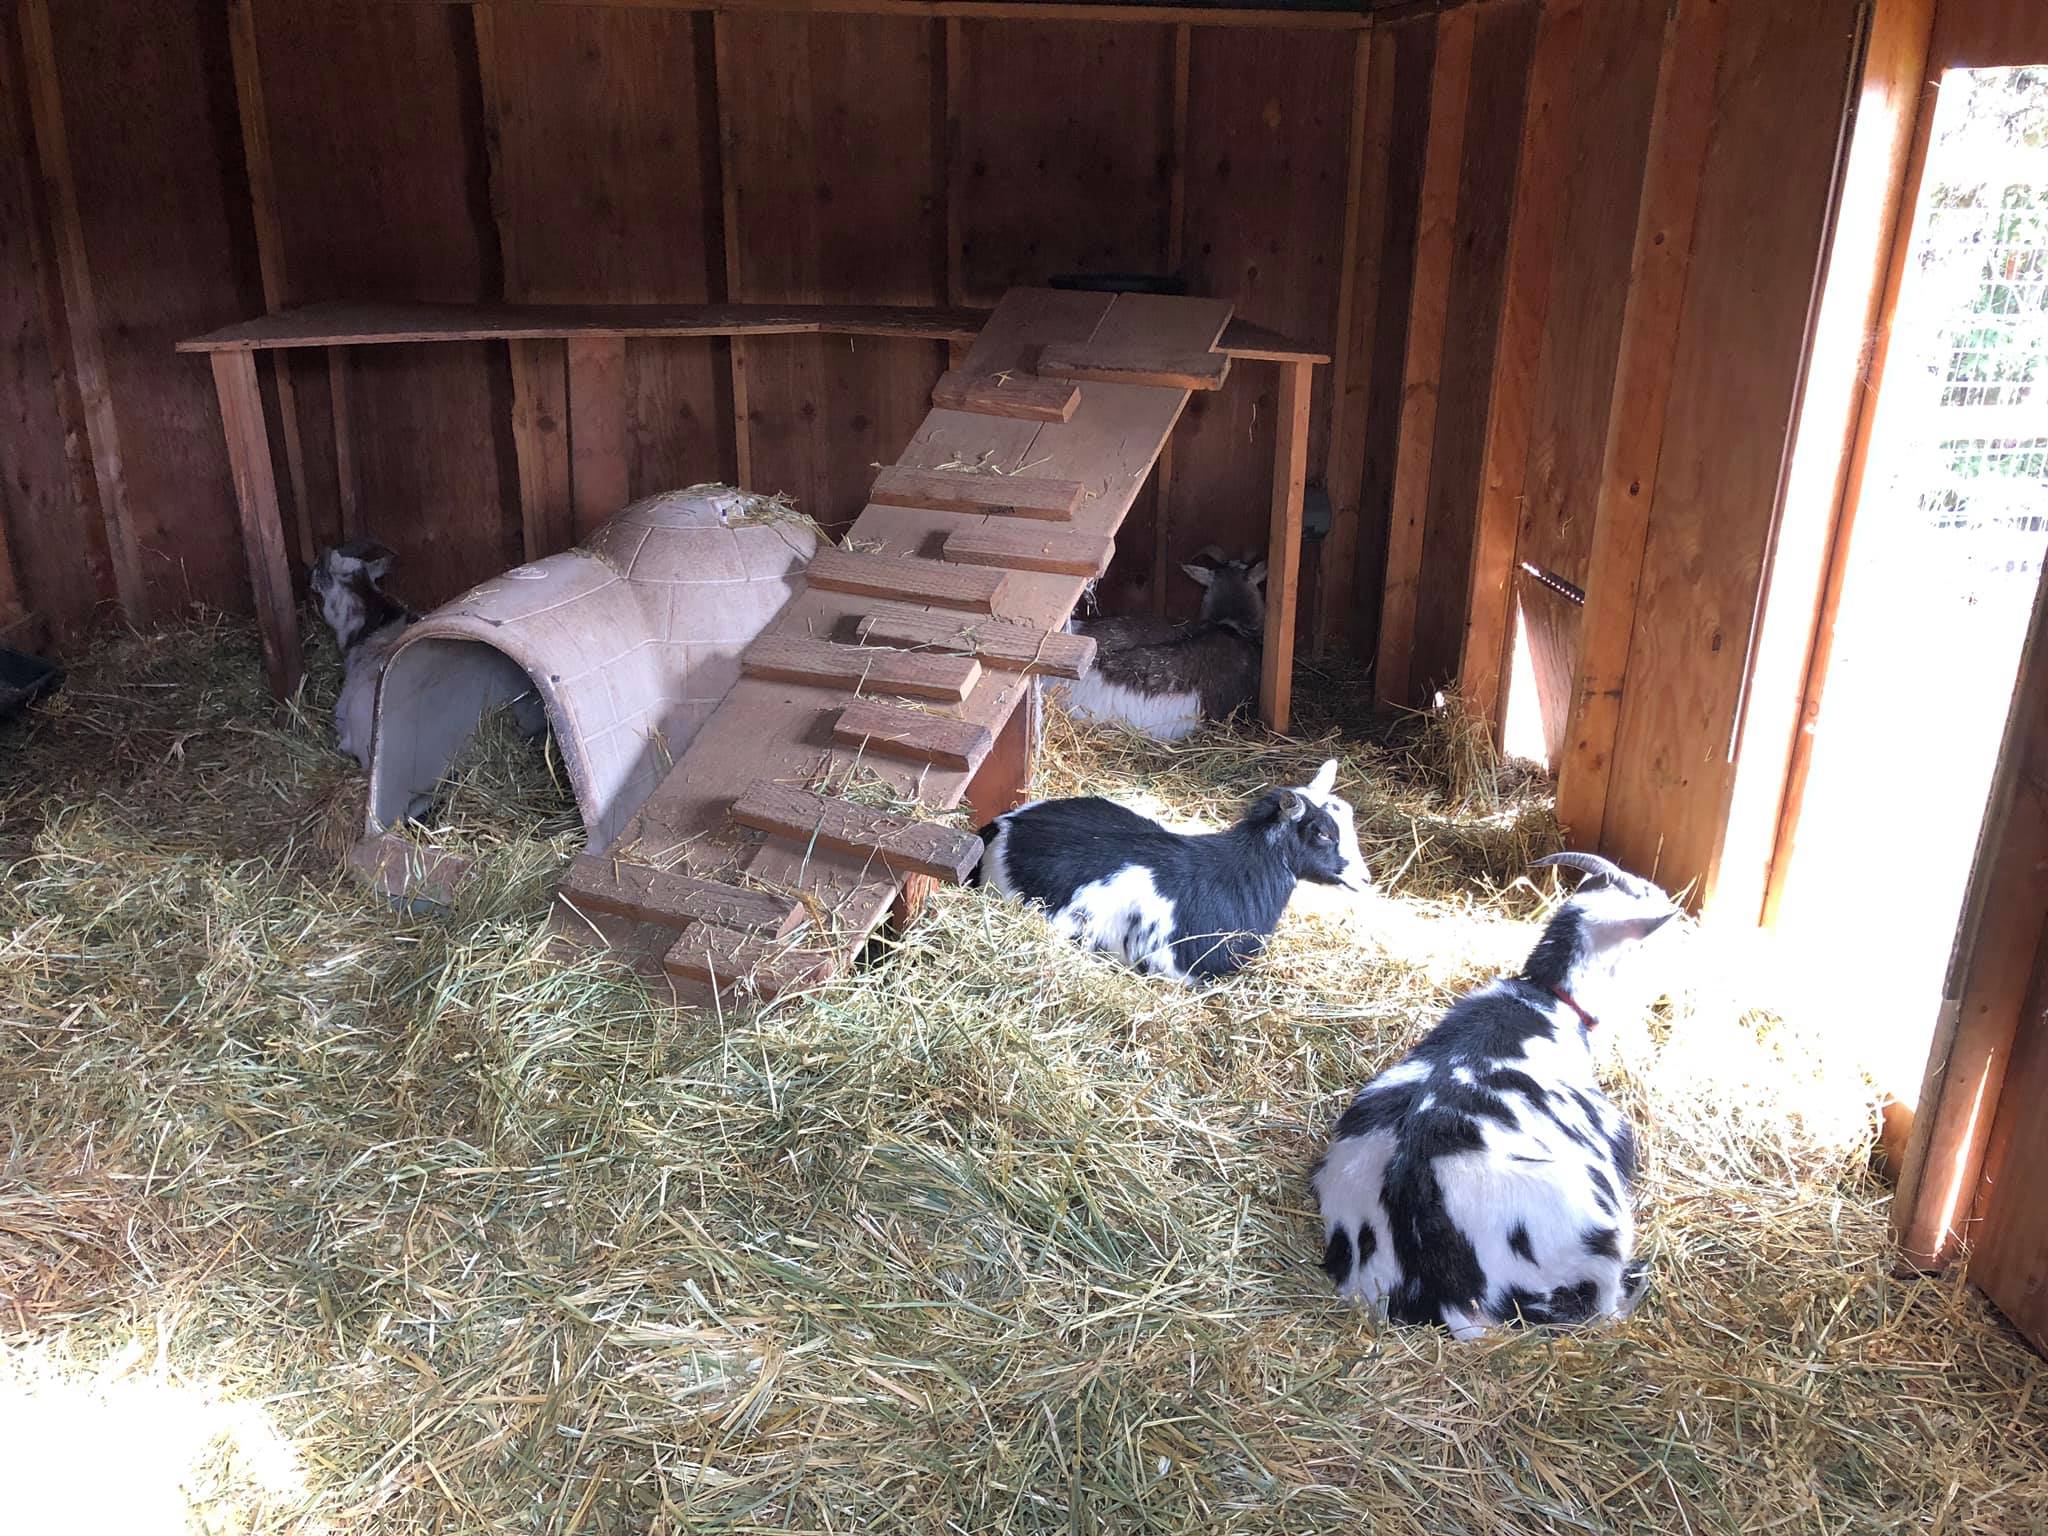 The web design team is taking a well deserved rest. Their office has been redecorates with fresh straw and bedding.